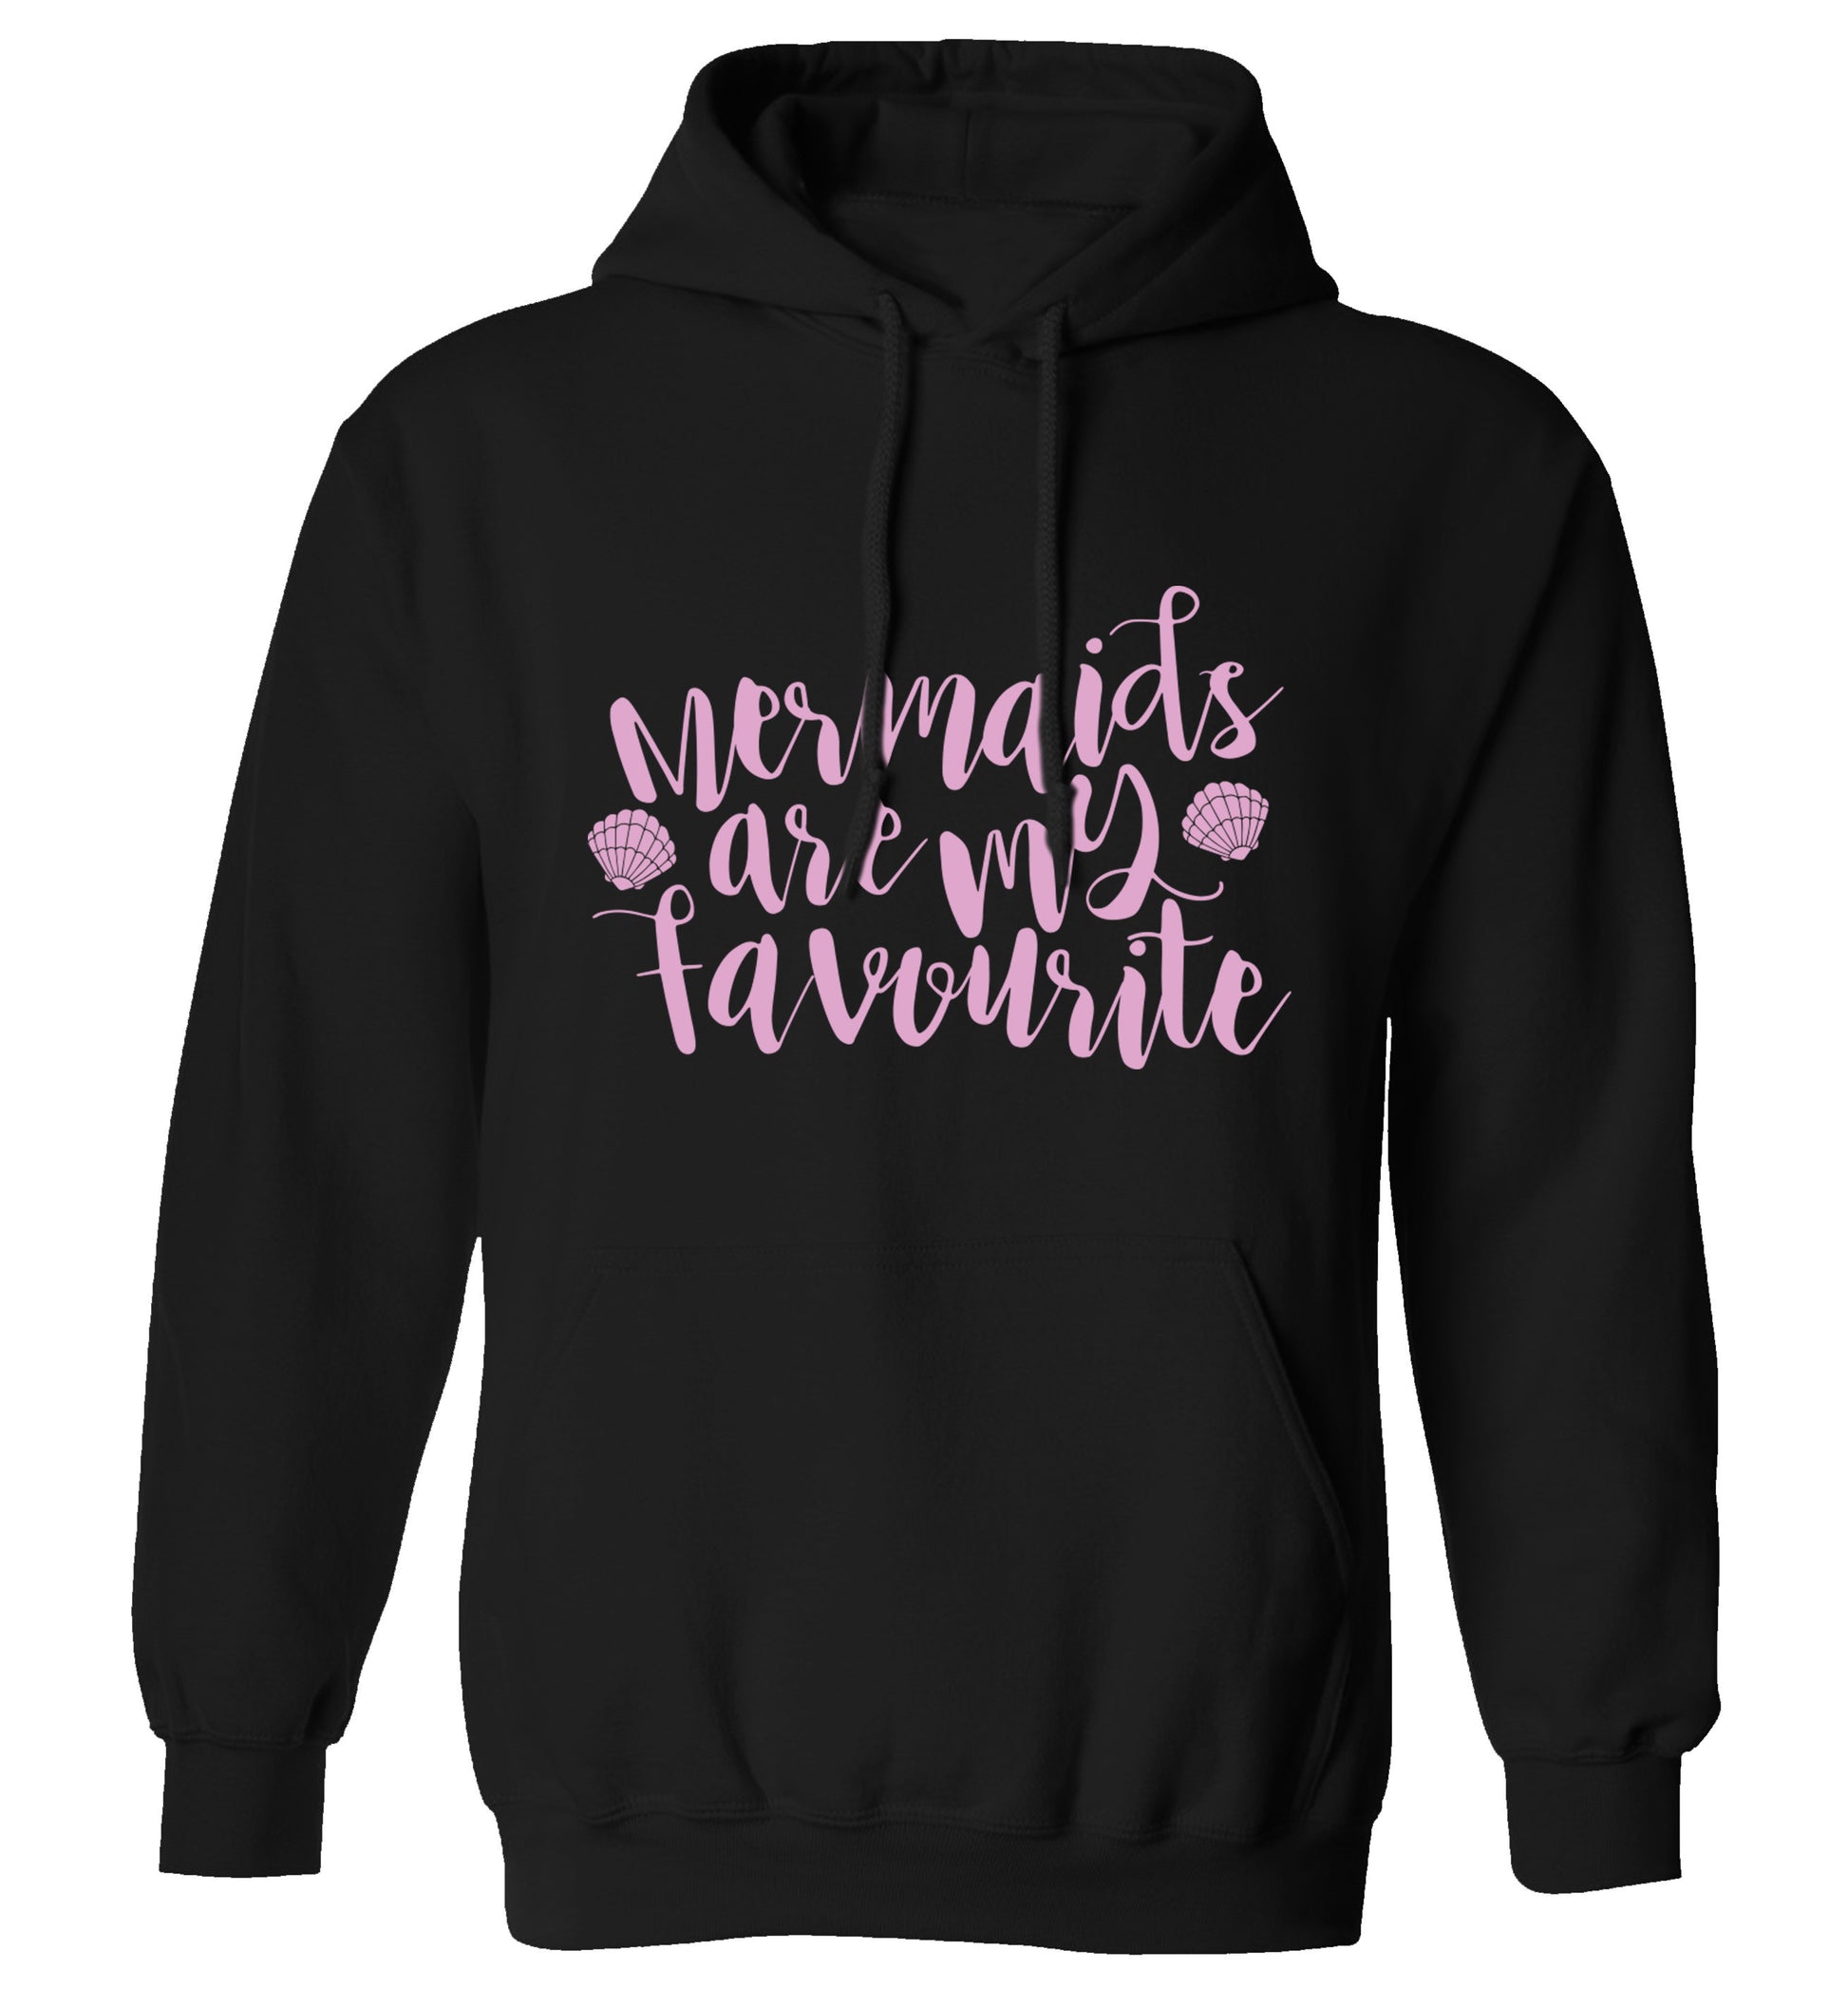 Mermaids are my favourite adults unisex black hoodie 2XL